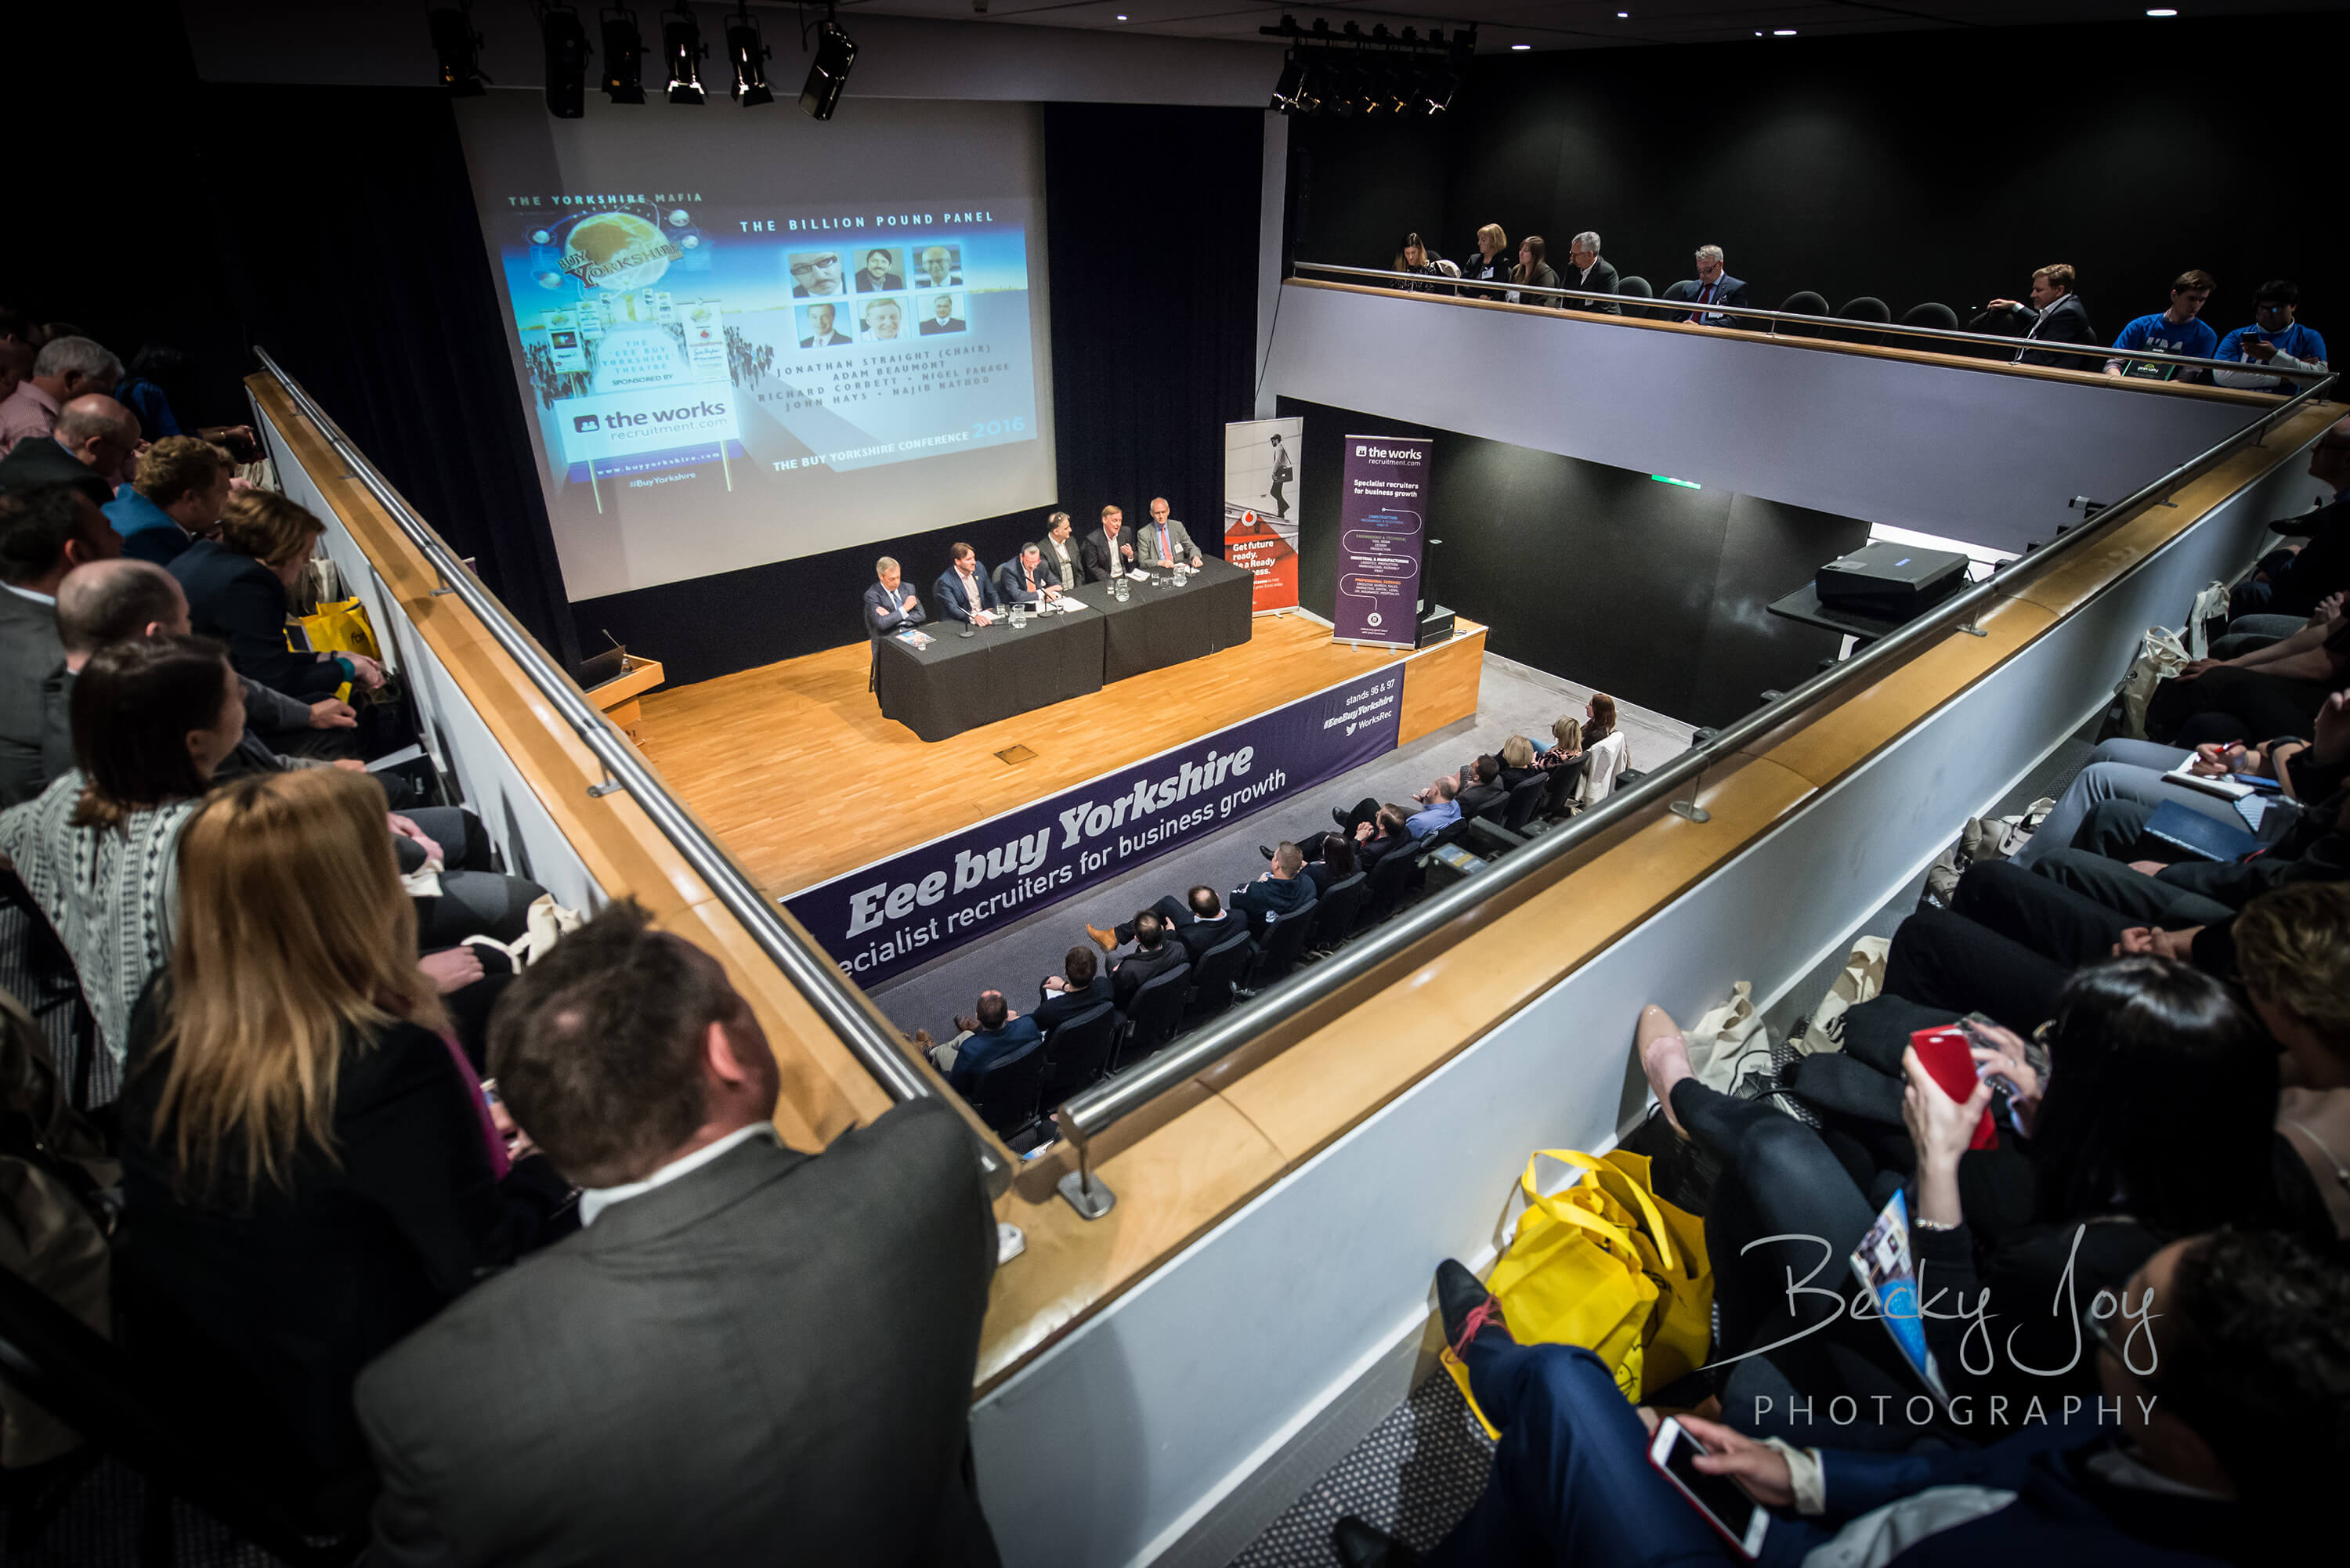 A view of a conference taking place at Royal Armouries